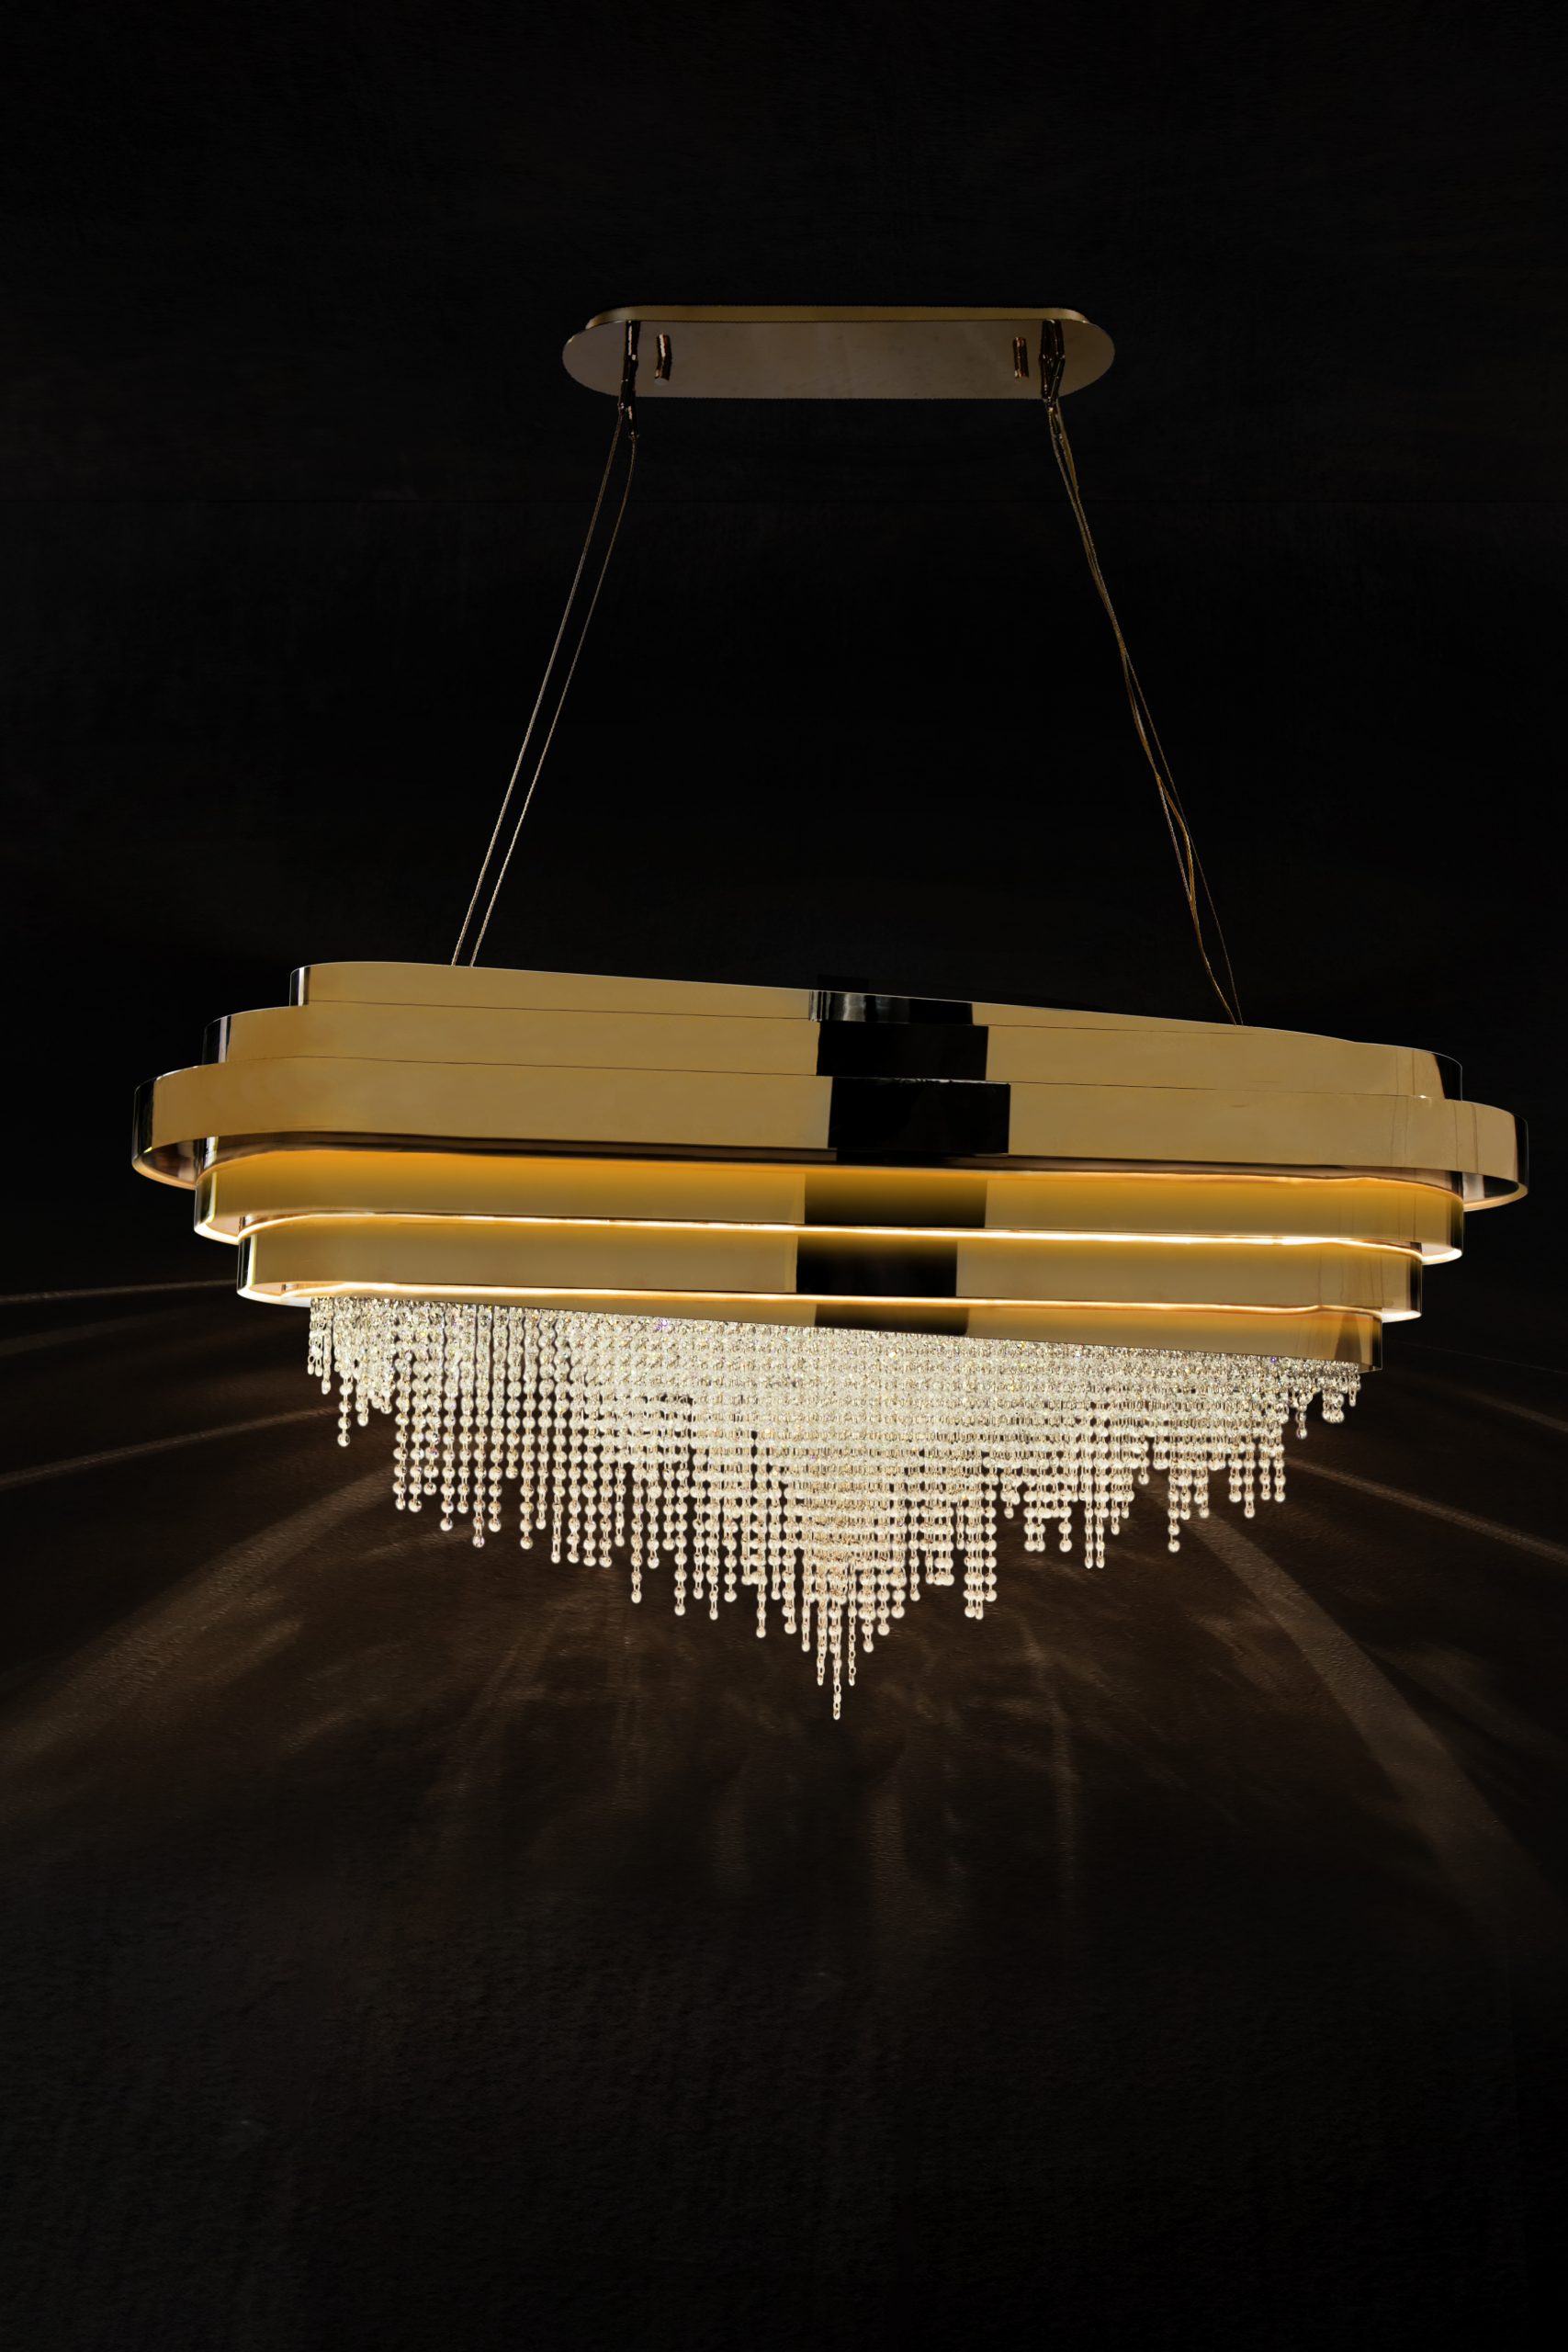 Time For A Change - Diversify Your Suspension Lighting Luxuriously